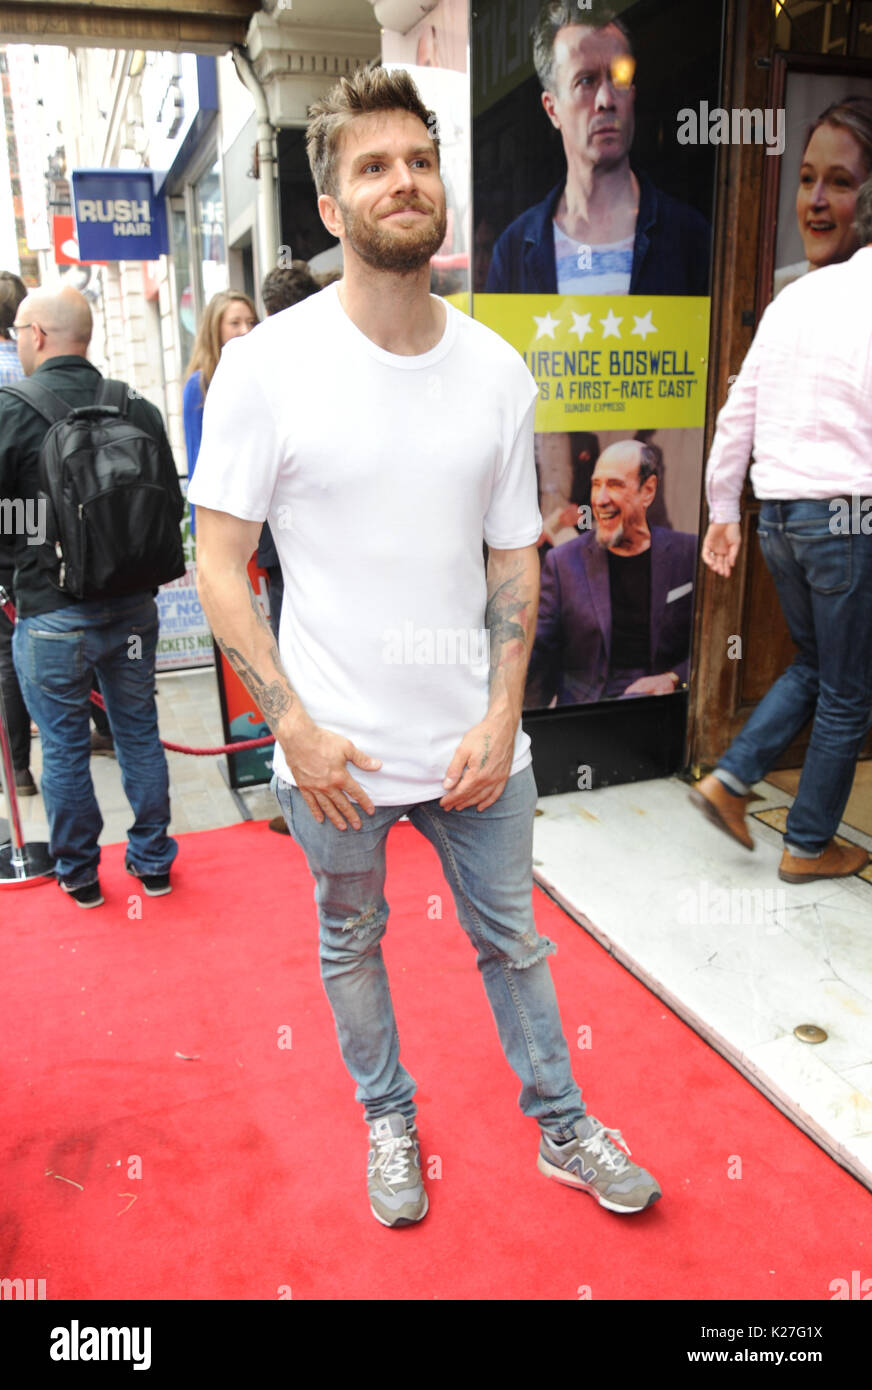 ‘The Hunting of the Snark’ Press Performance and Opening at the Vaudeville Theatre - Outside Arrivals  Featuring: Joel Dommett Where: London, United Kingdom When: 28 Jul 2017 Credit: WENN.com Stock Photo